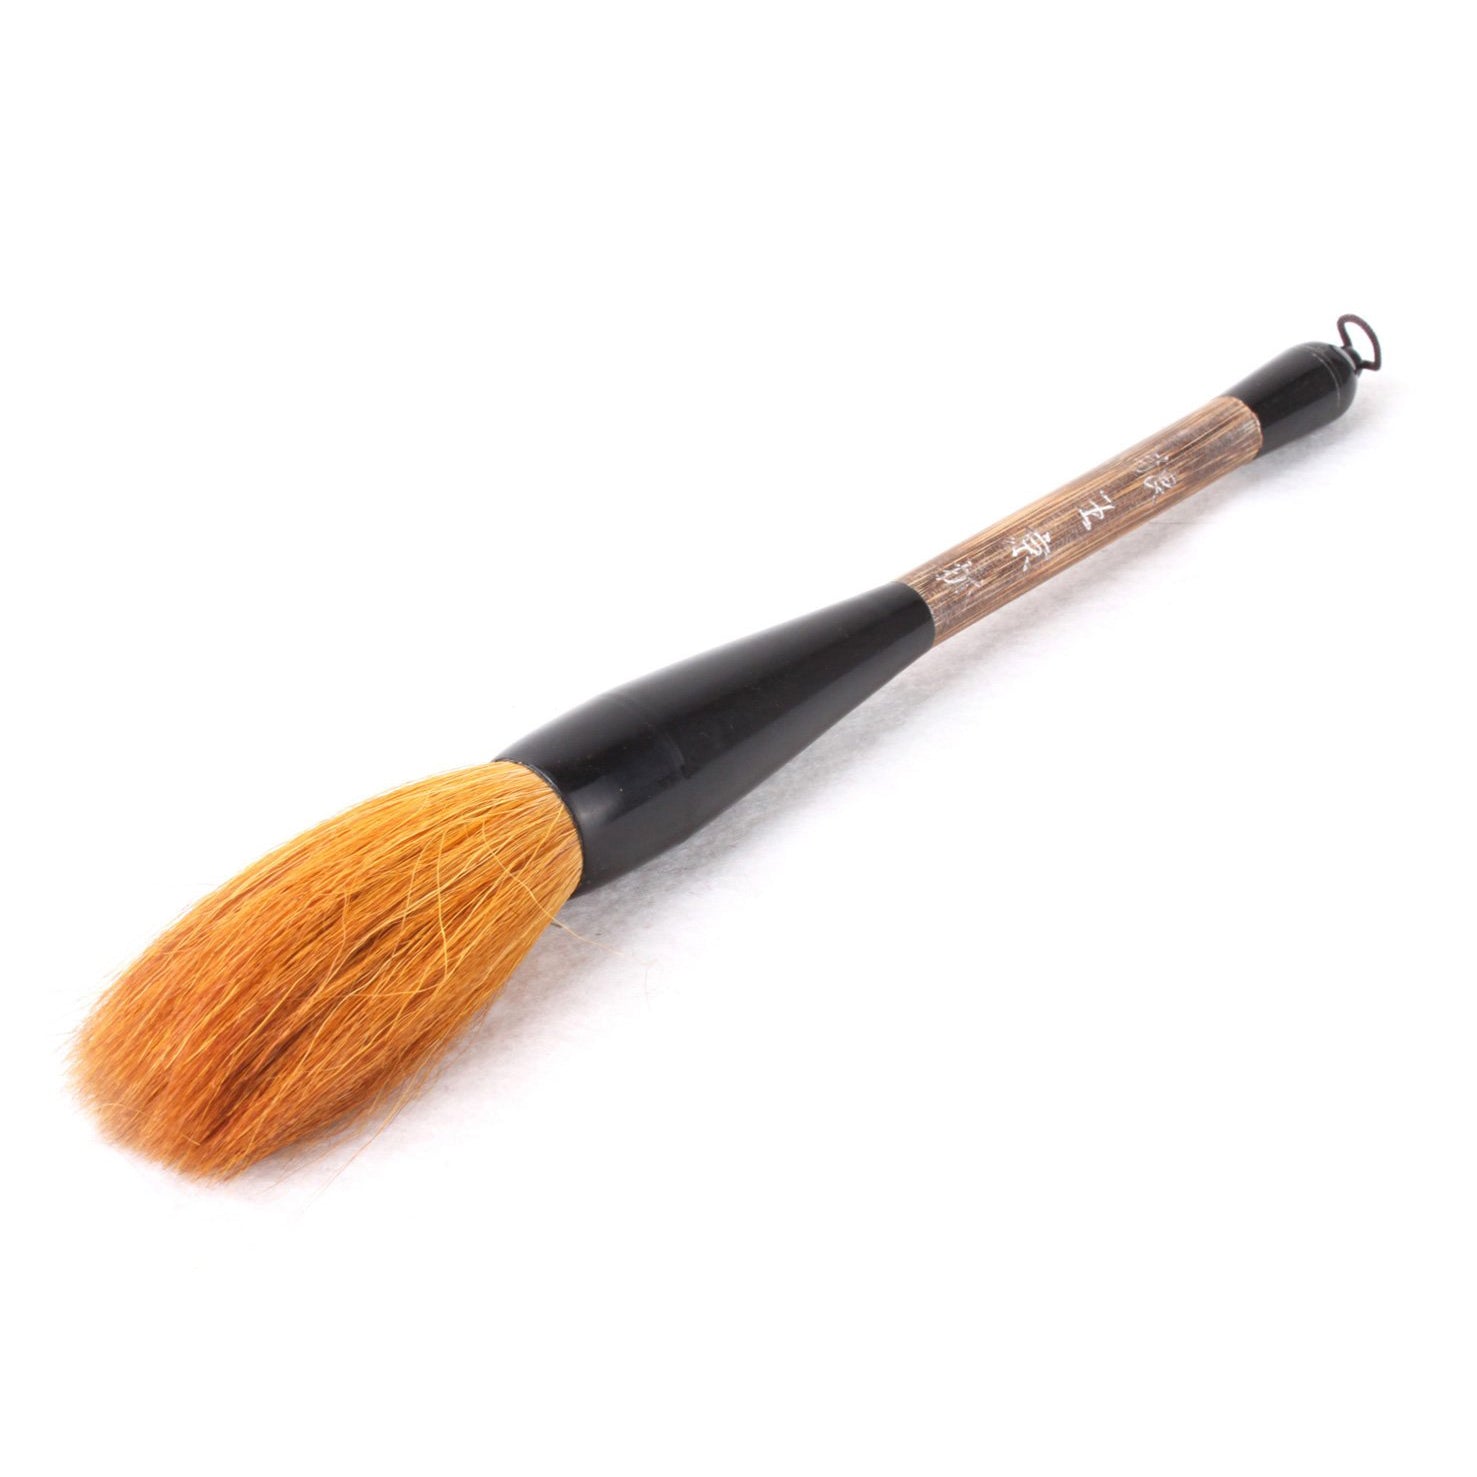 Willy the Weasel - An excellent brush made of Weasel Hair with a Large Tip for Calligraphy Writing and Sumi-e Painting